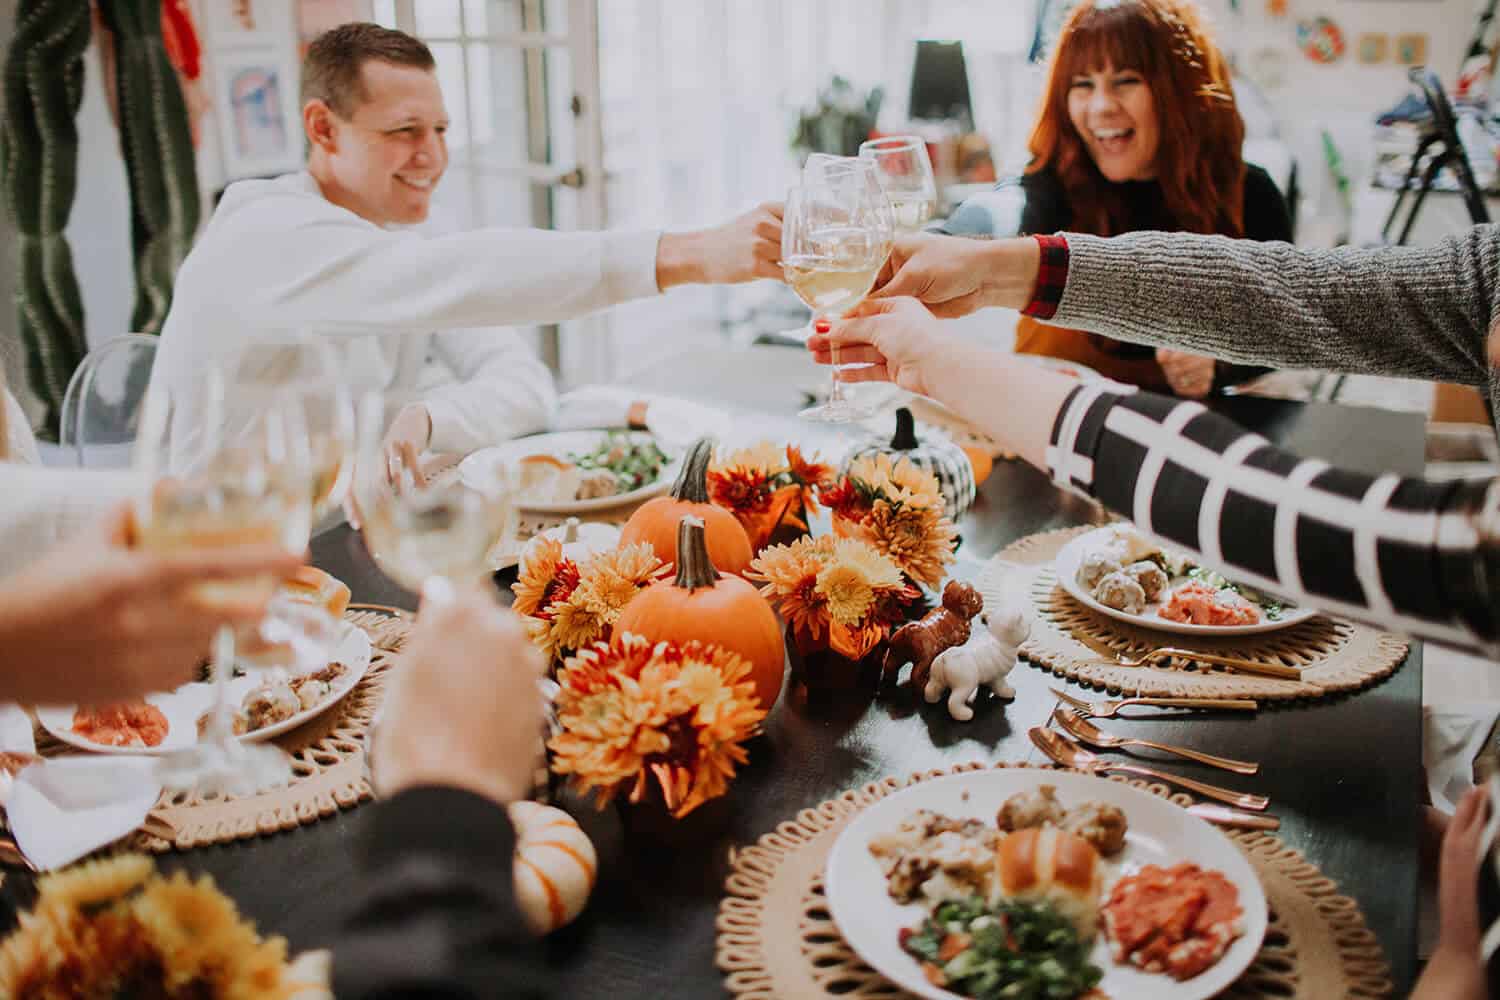 Easy Friendsgiving Hosting Tips - A Beautiful Mess